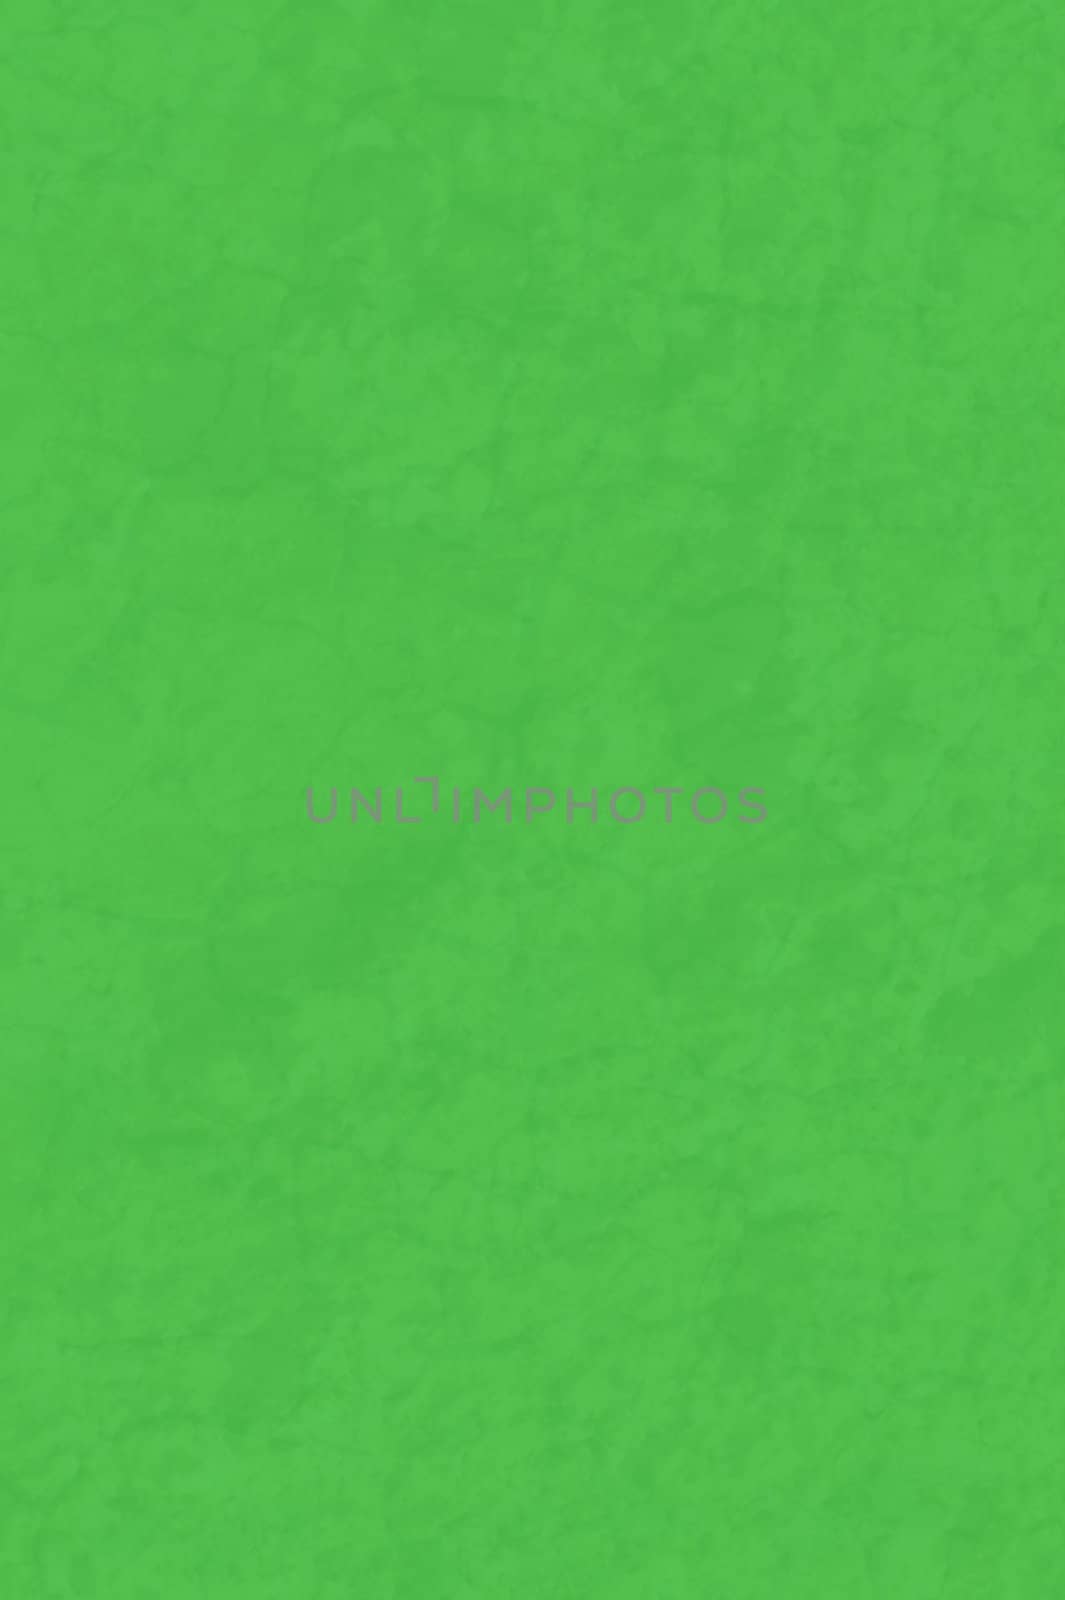 Abstract textured  light green background